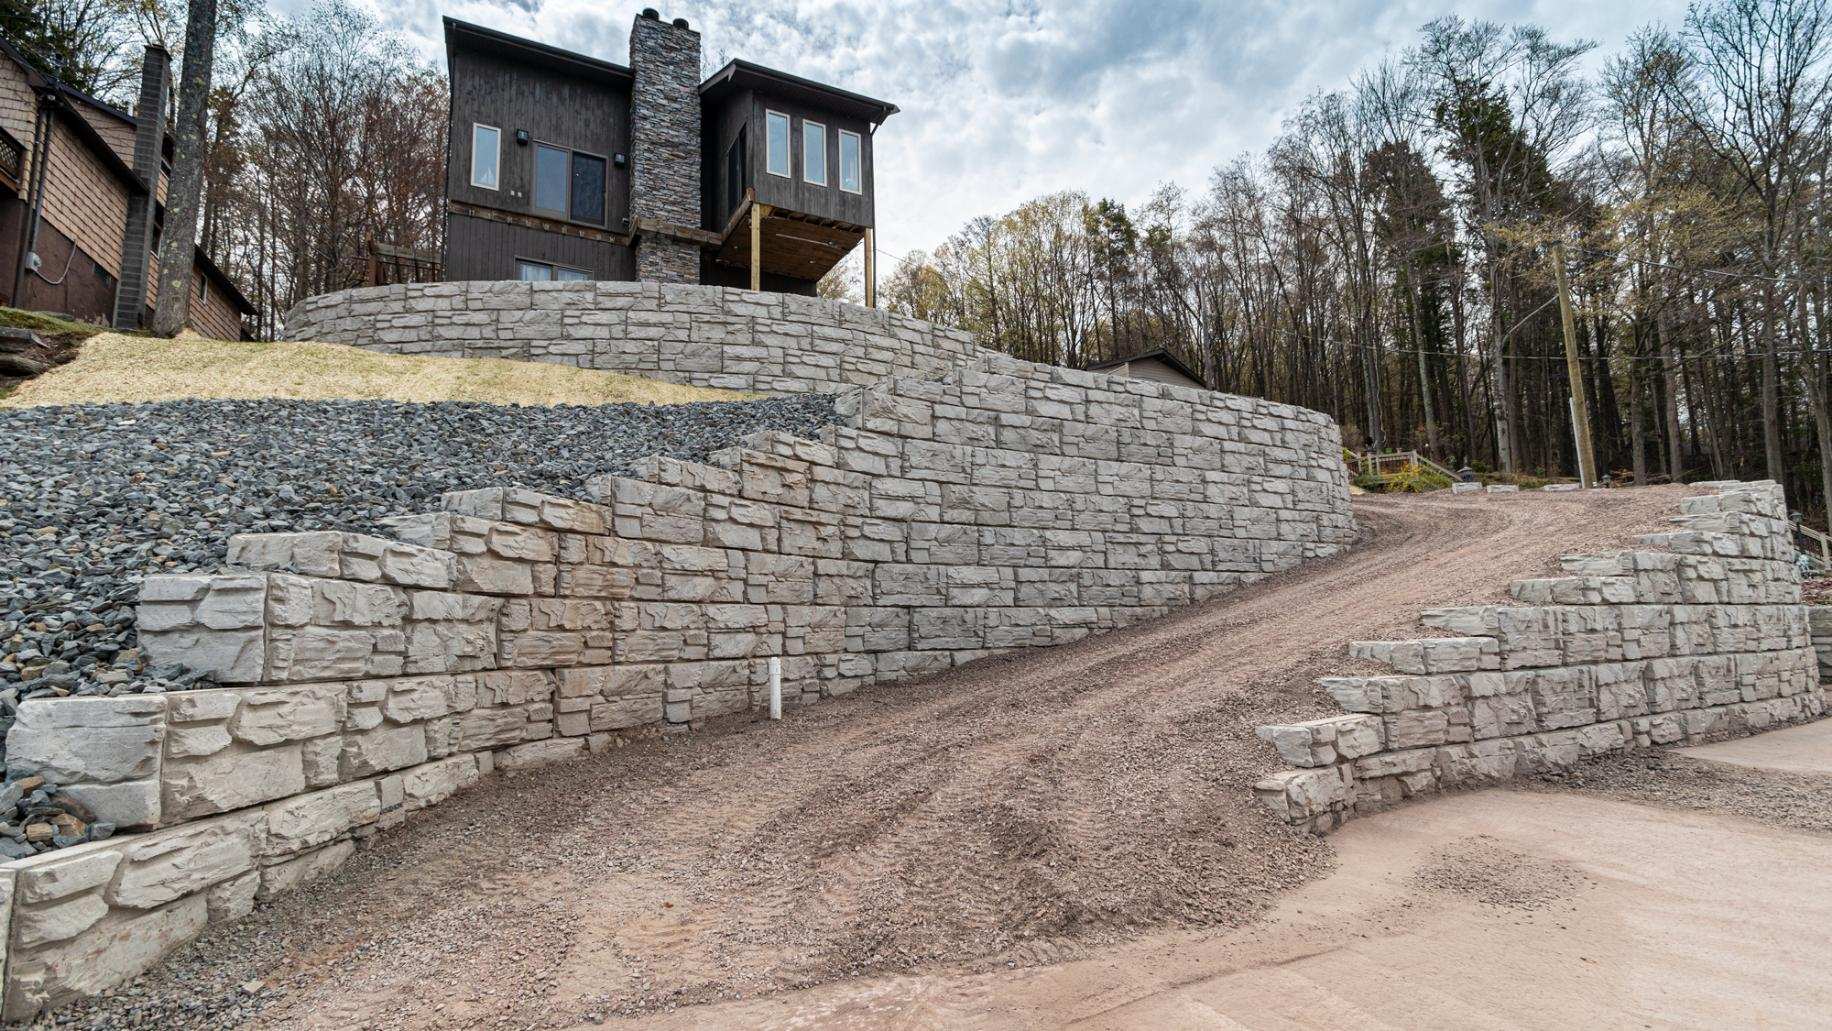 Residential project with sloped, curved driveway walls.